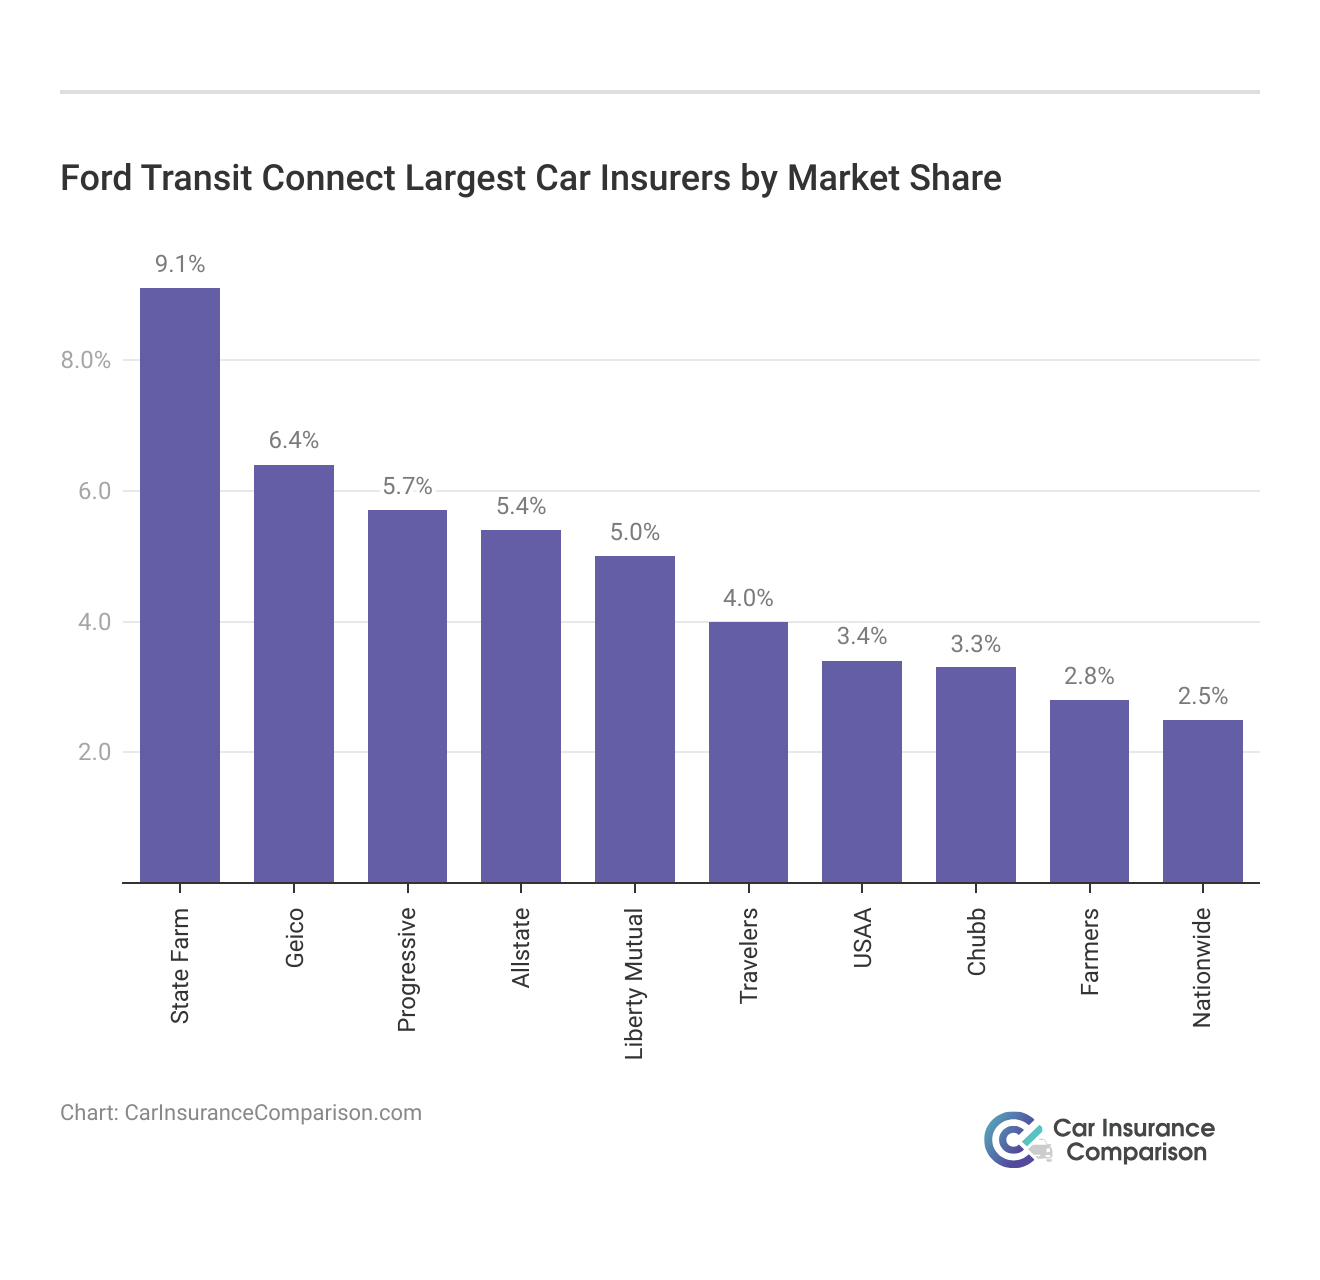 <h3>Ford Transit Connect Largest Car Insurers by Market Share</h3>